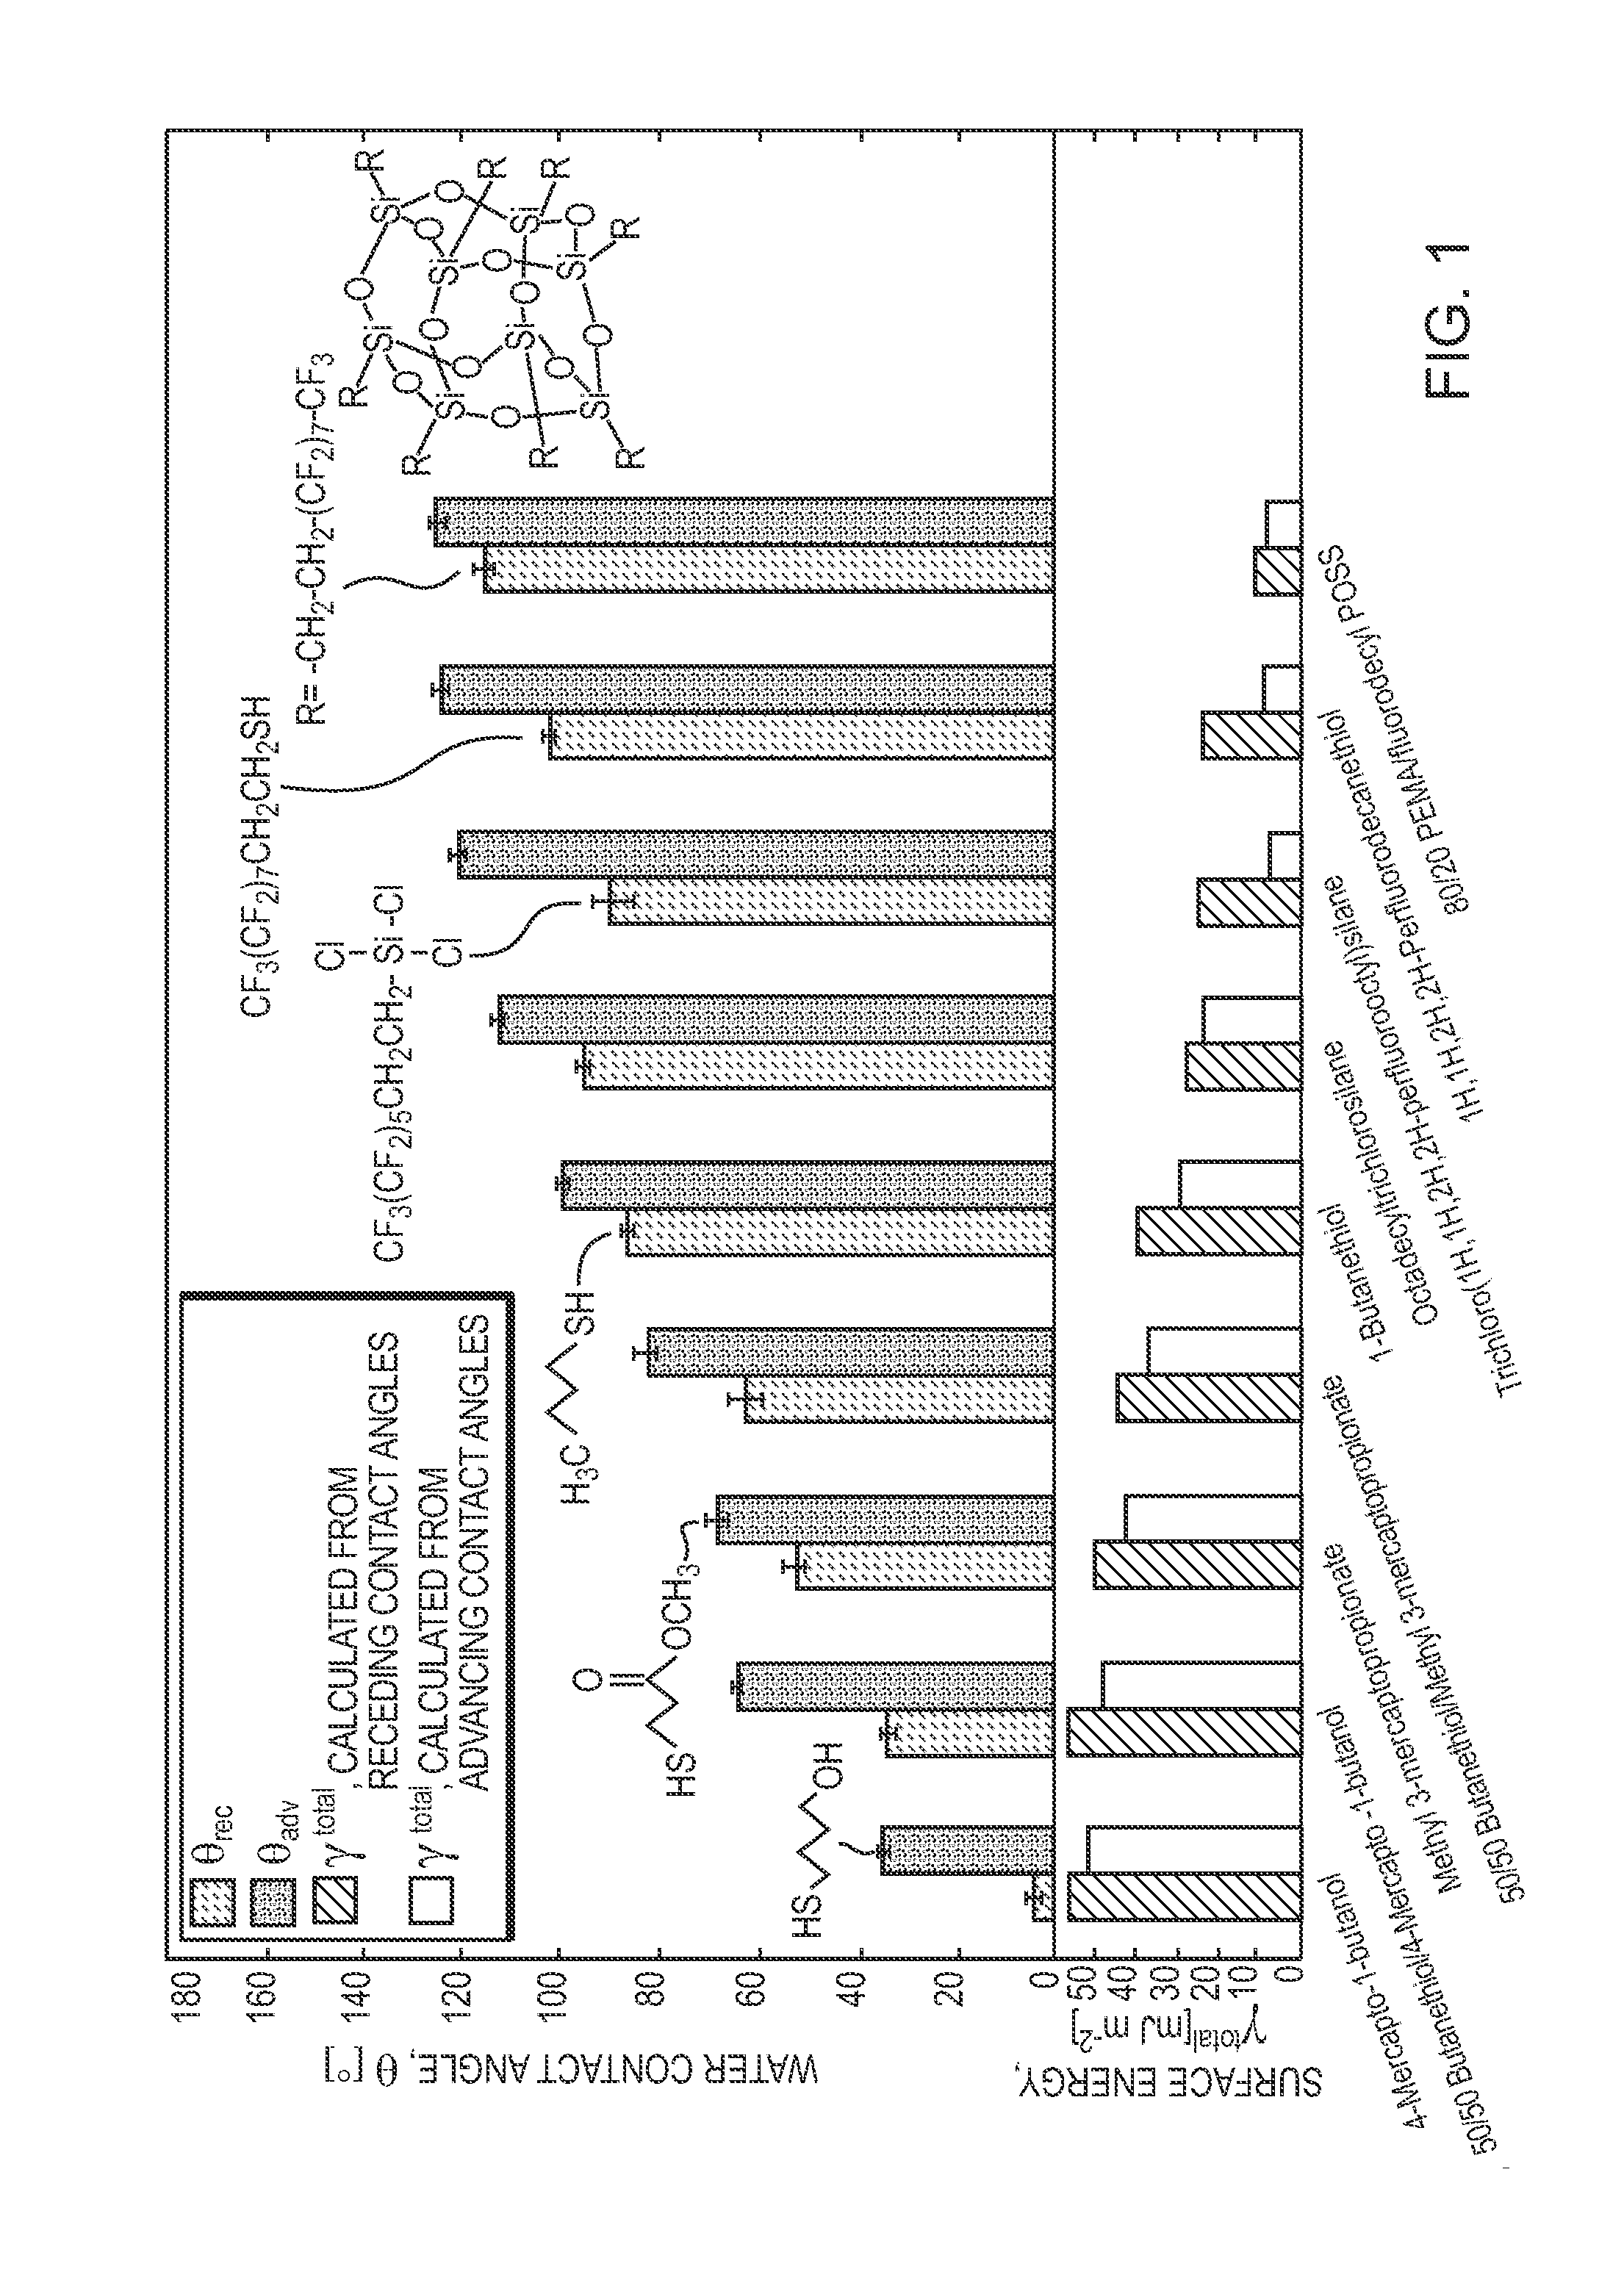 Articles and methods for reducing hydrate adhesion